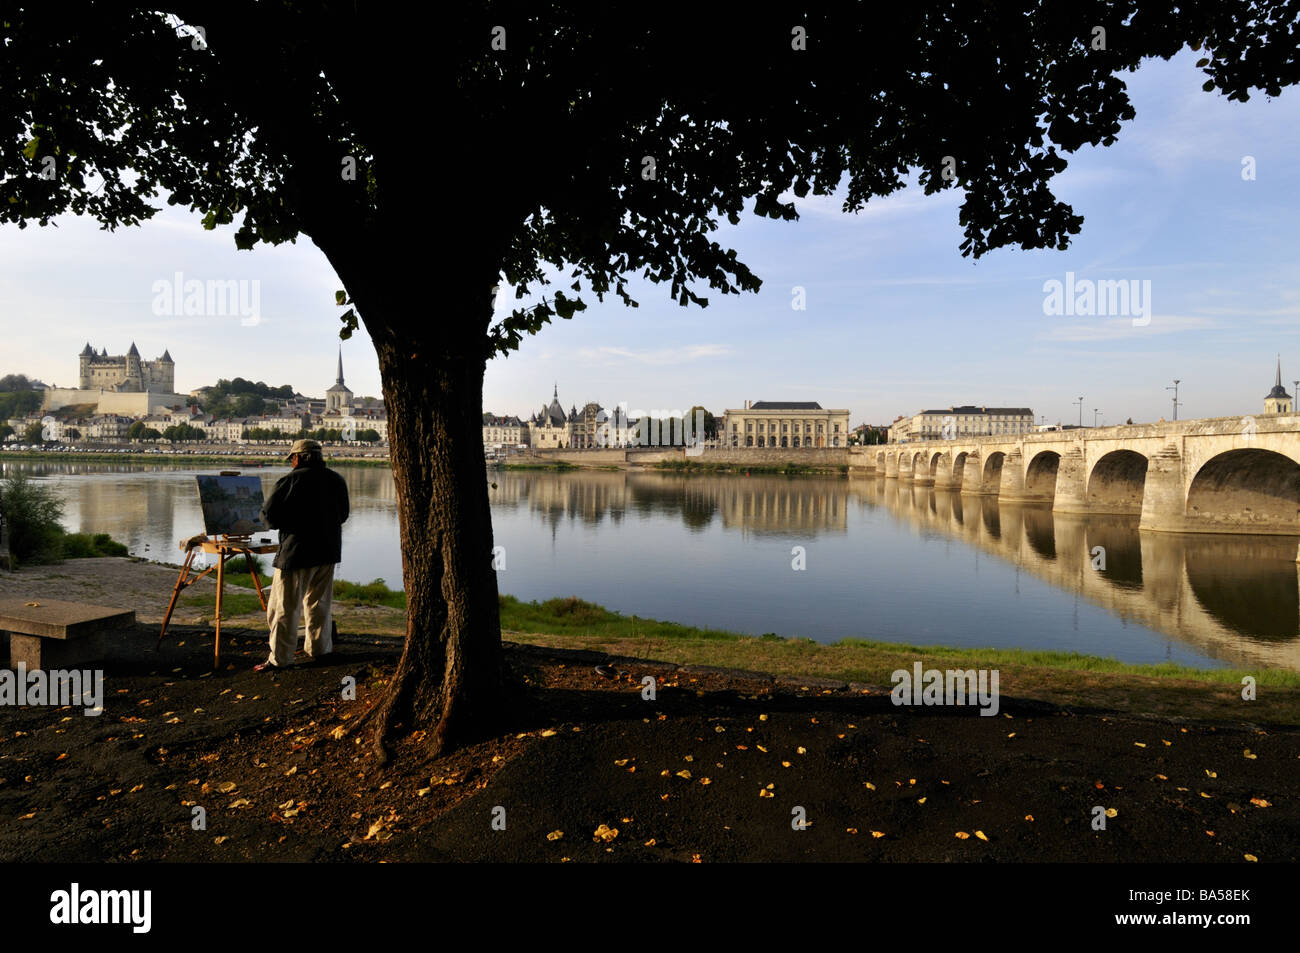 Painter painting by River Loire, Saumur, France. Stock Photo